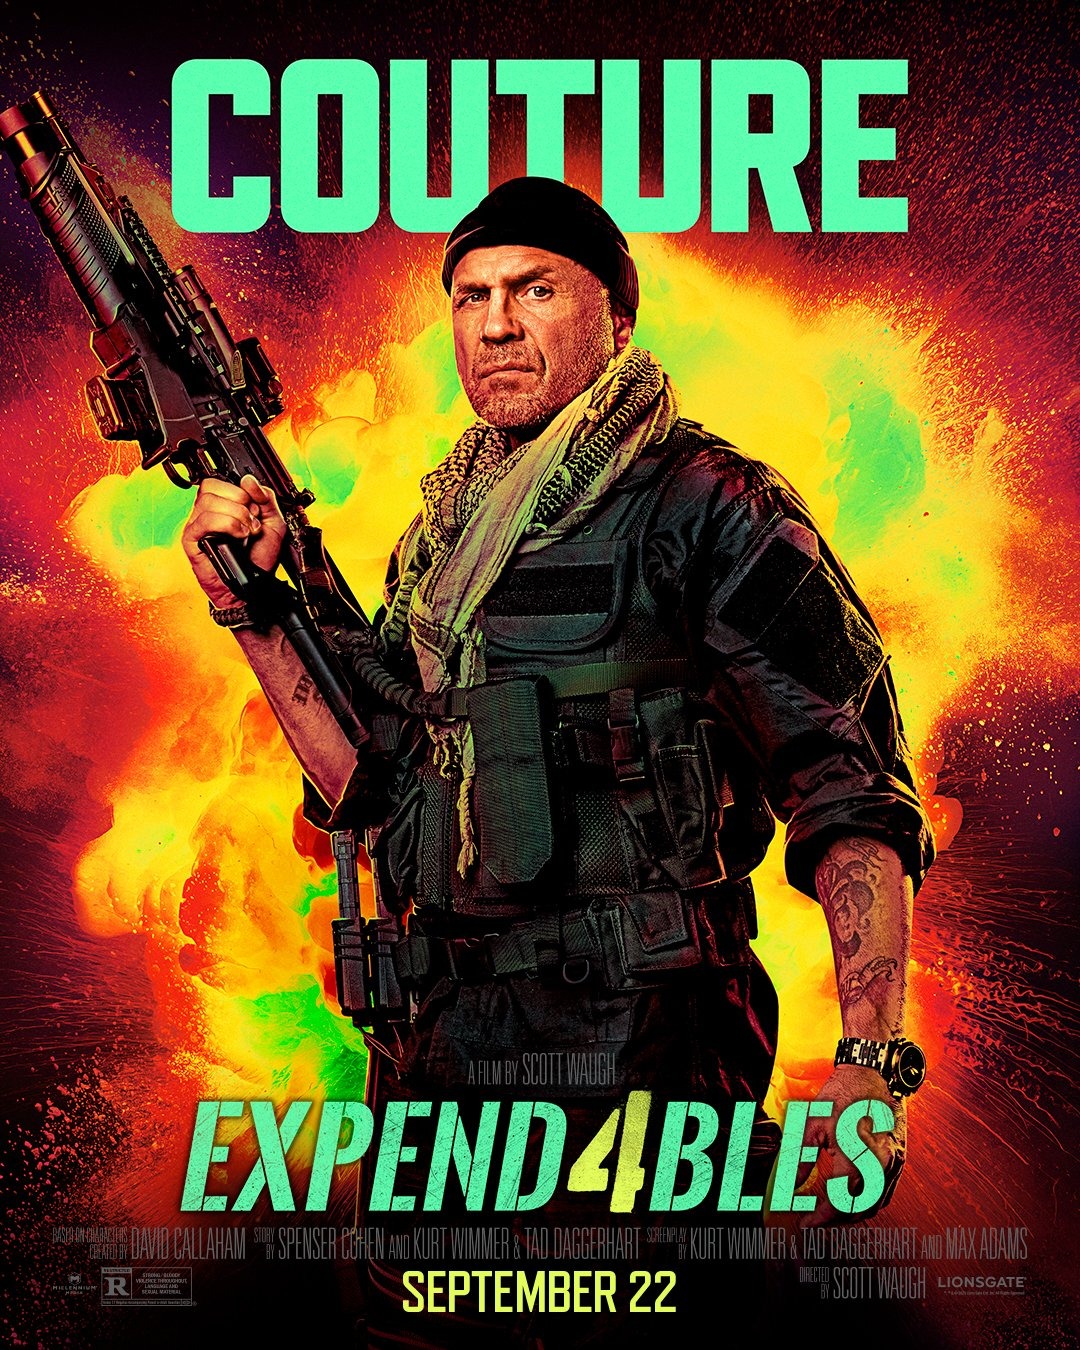 Randy Couture as Toll Road in Expend4bles.